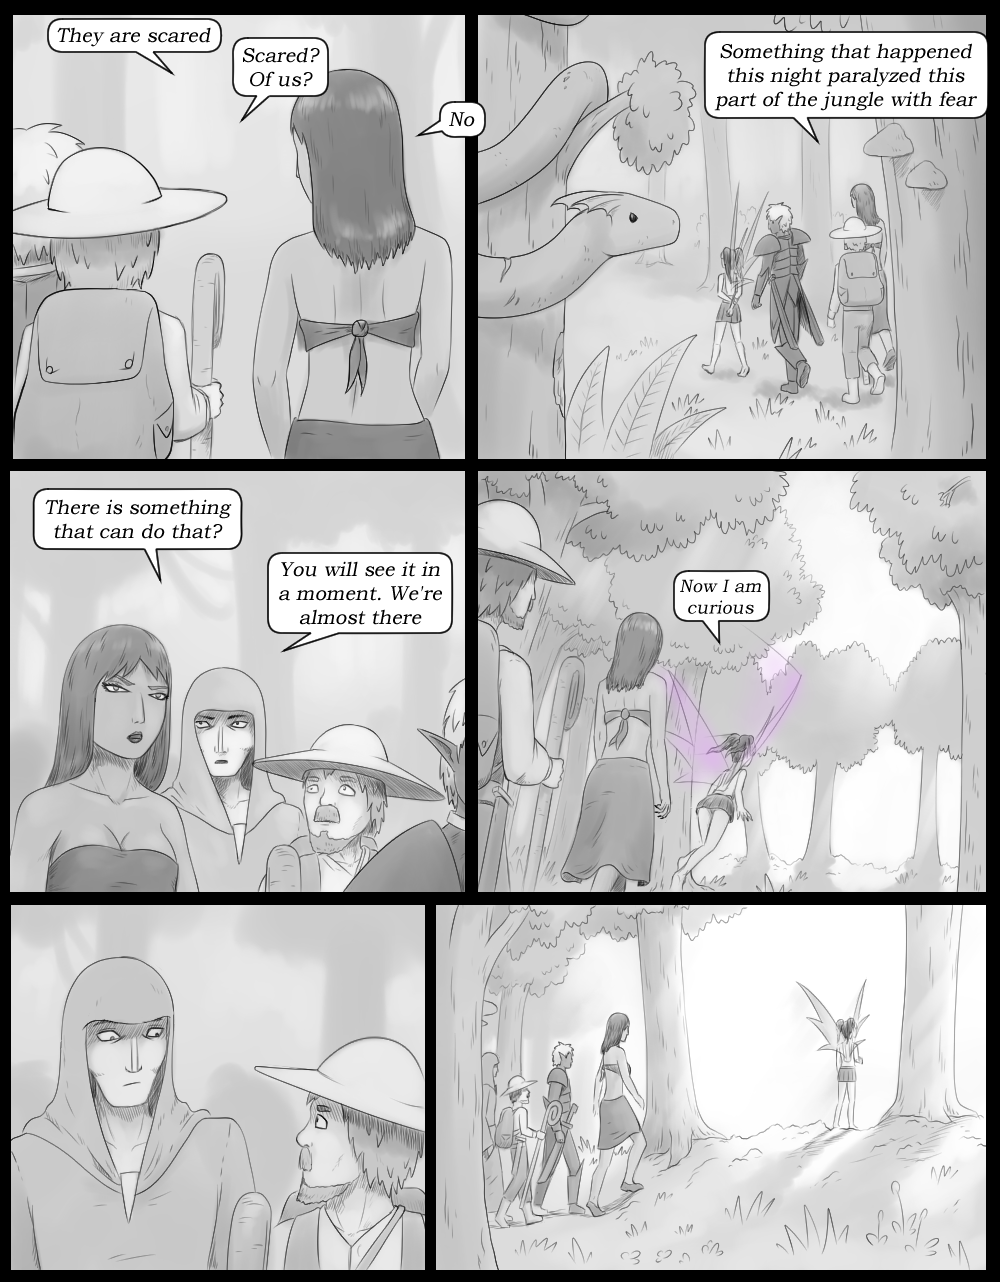 Page 25 - The eye of fear